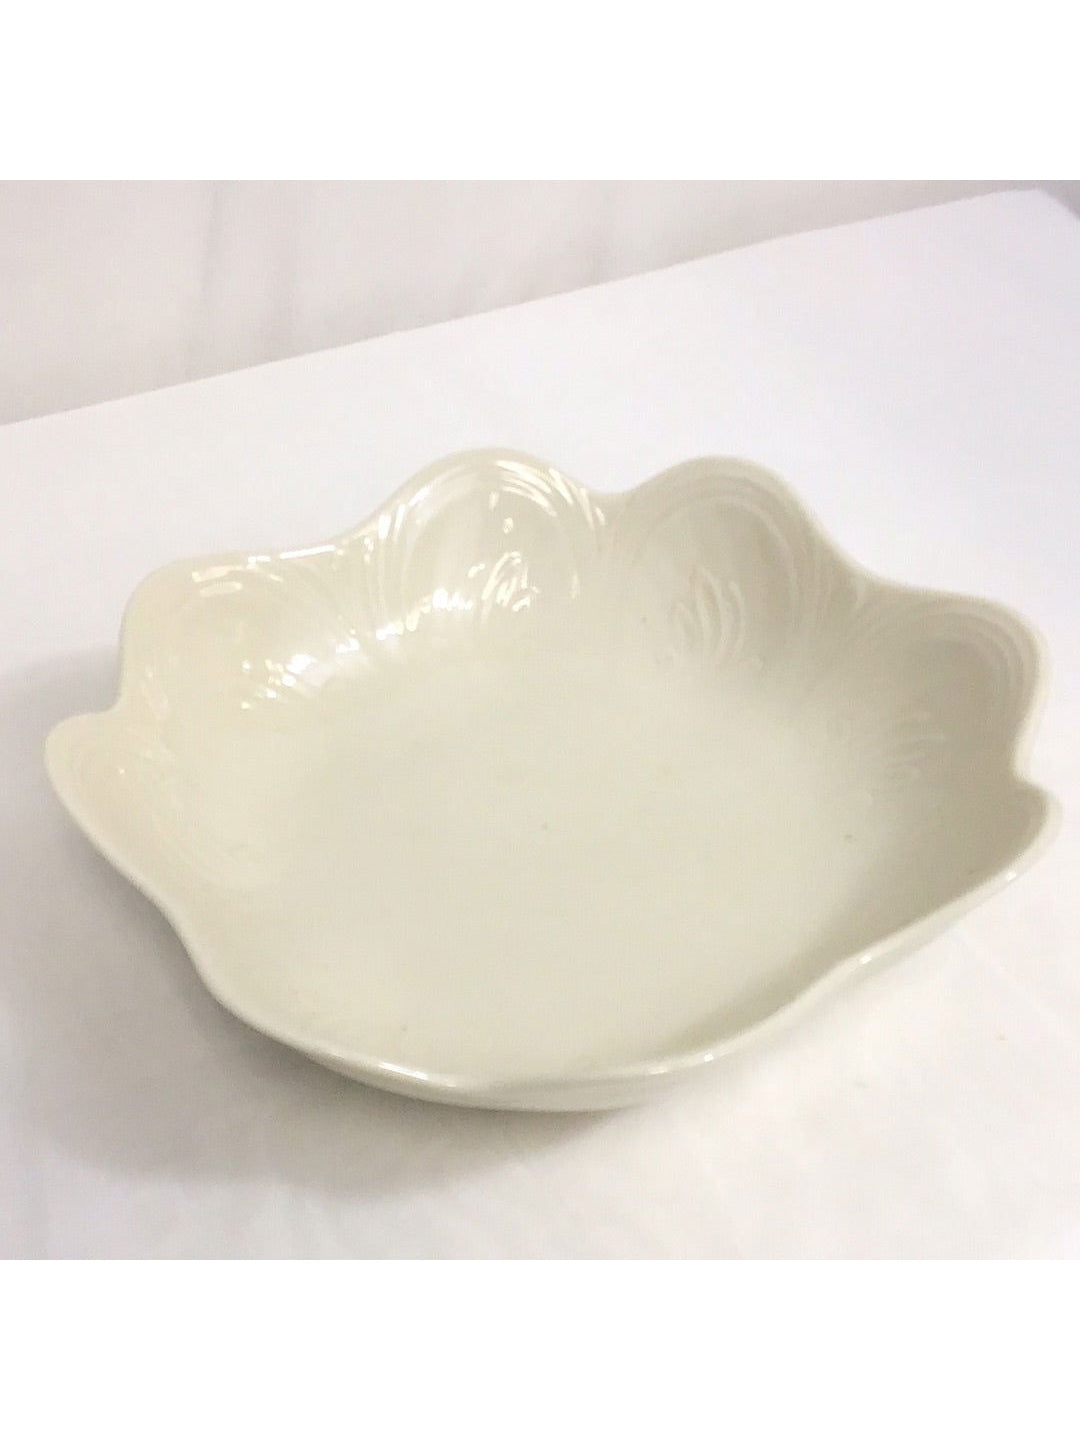 Lenox Scalloped Bowl - The Kennedy Collective Thrift - 